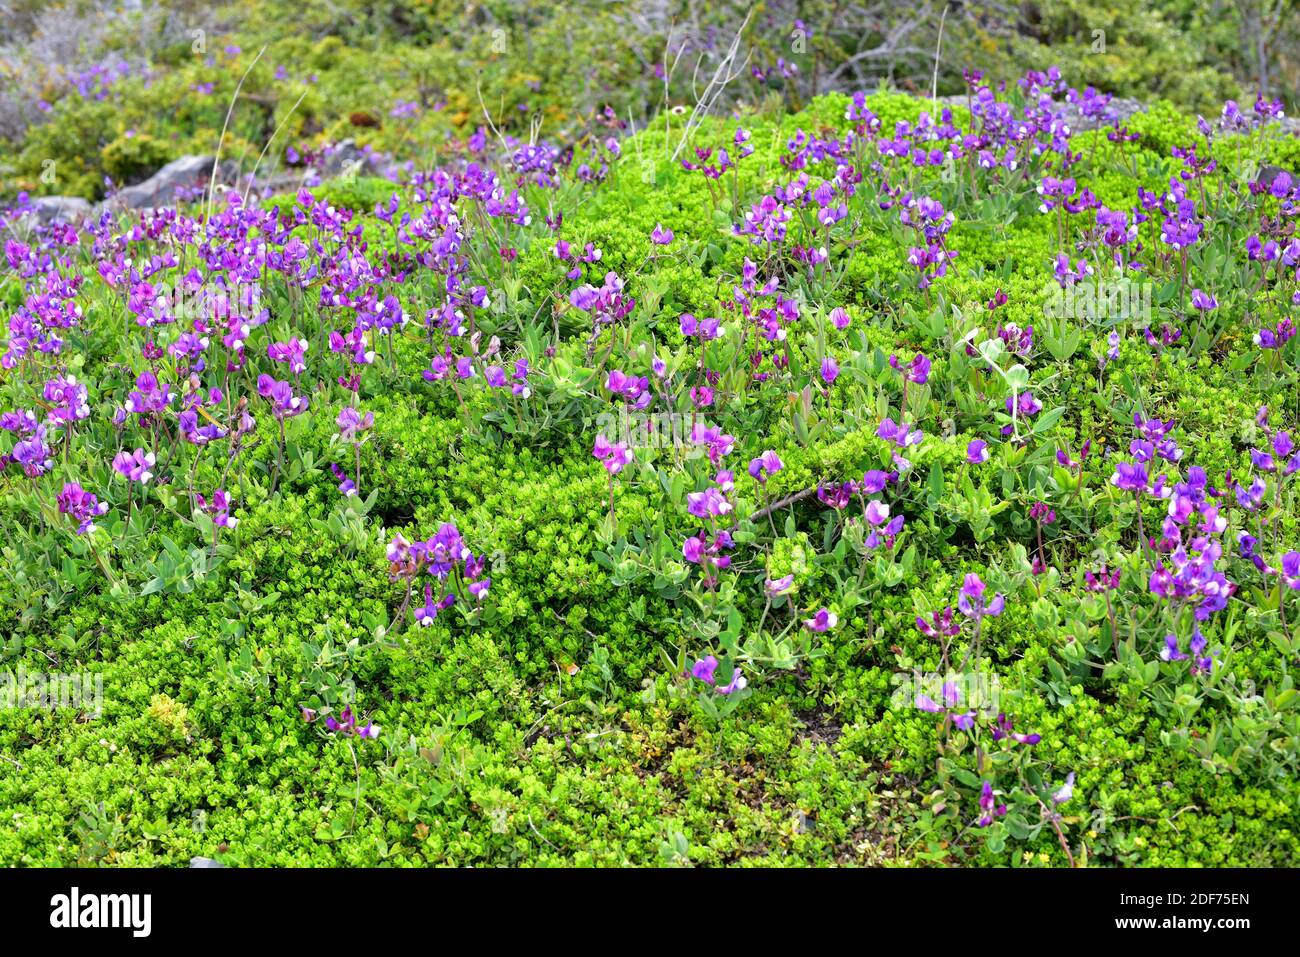 Cape Horn pea or Lord Anson pea (Lathyrus magellanicus) is a perennial herb native to South America. This photo was taken in Torres del Paine Stock Photo